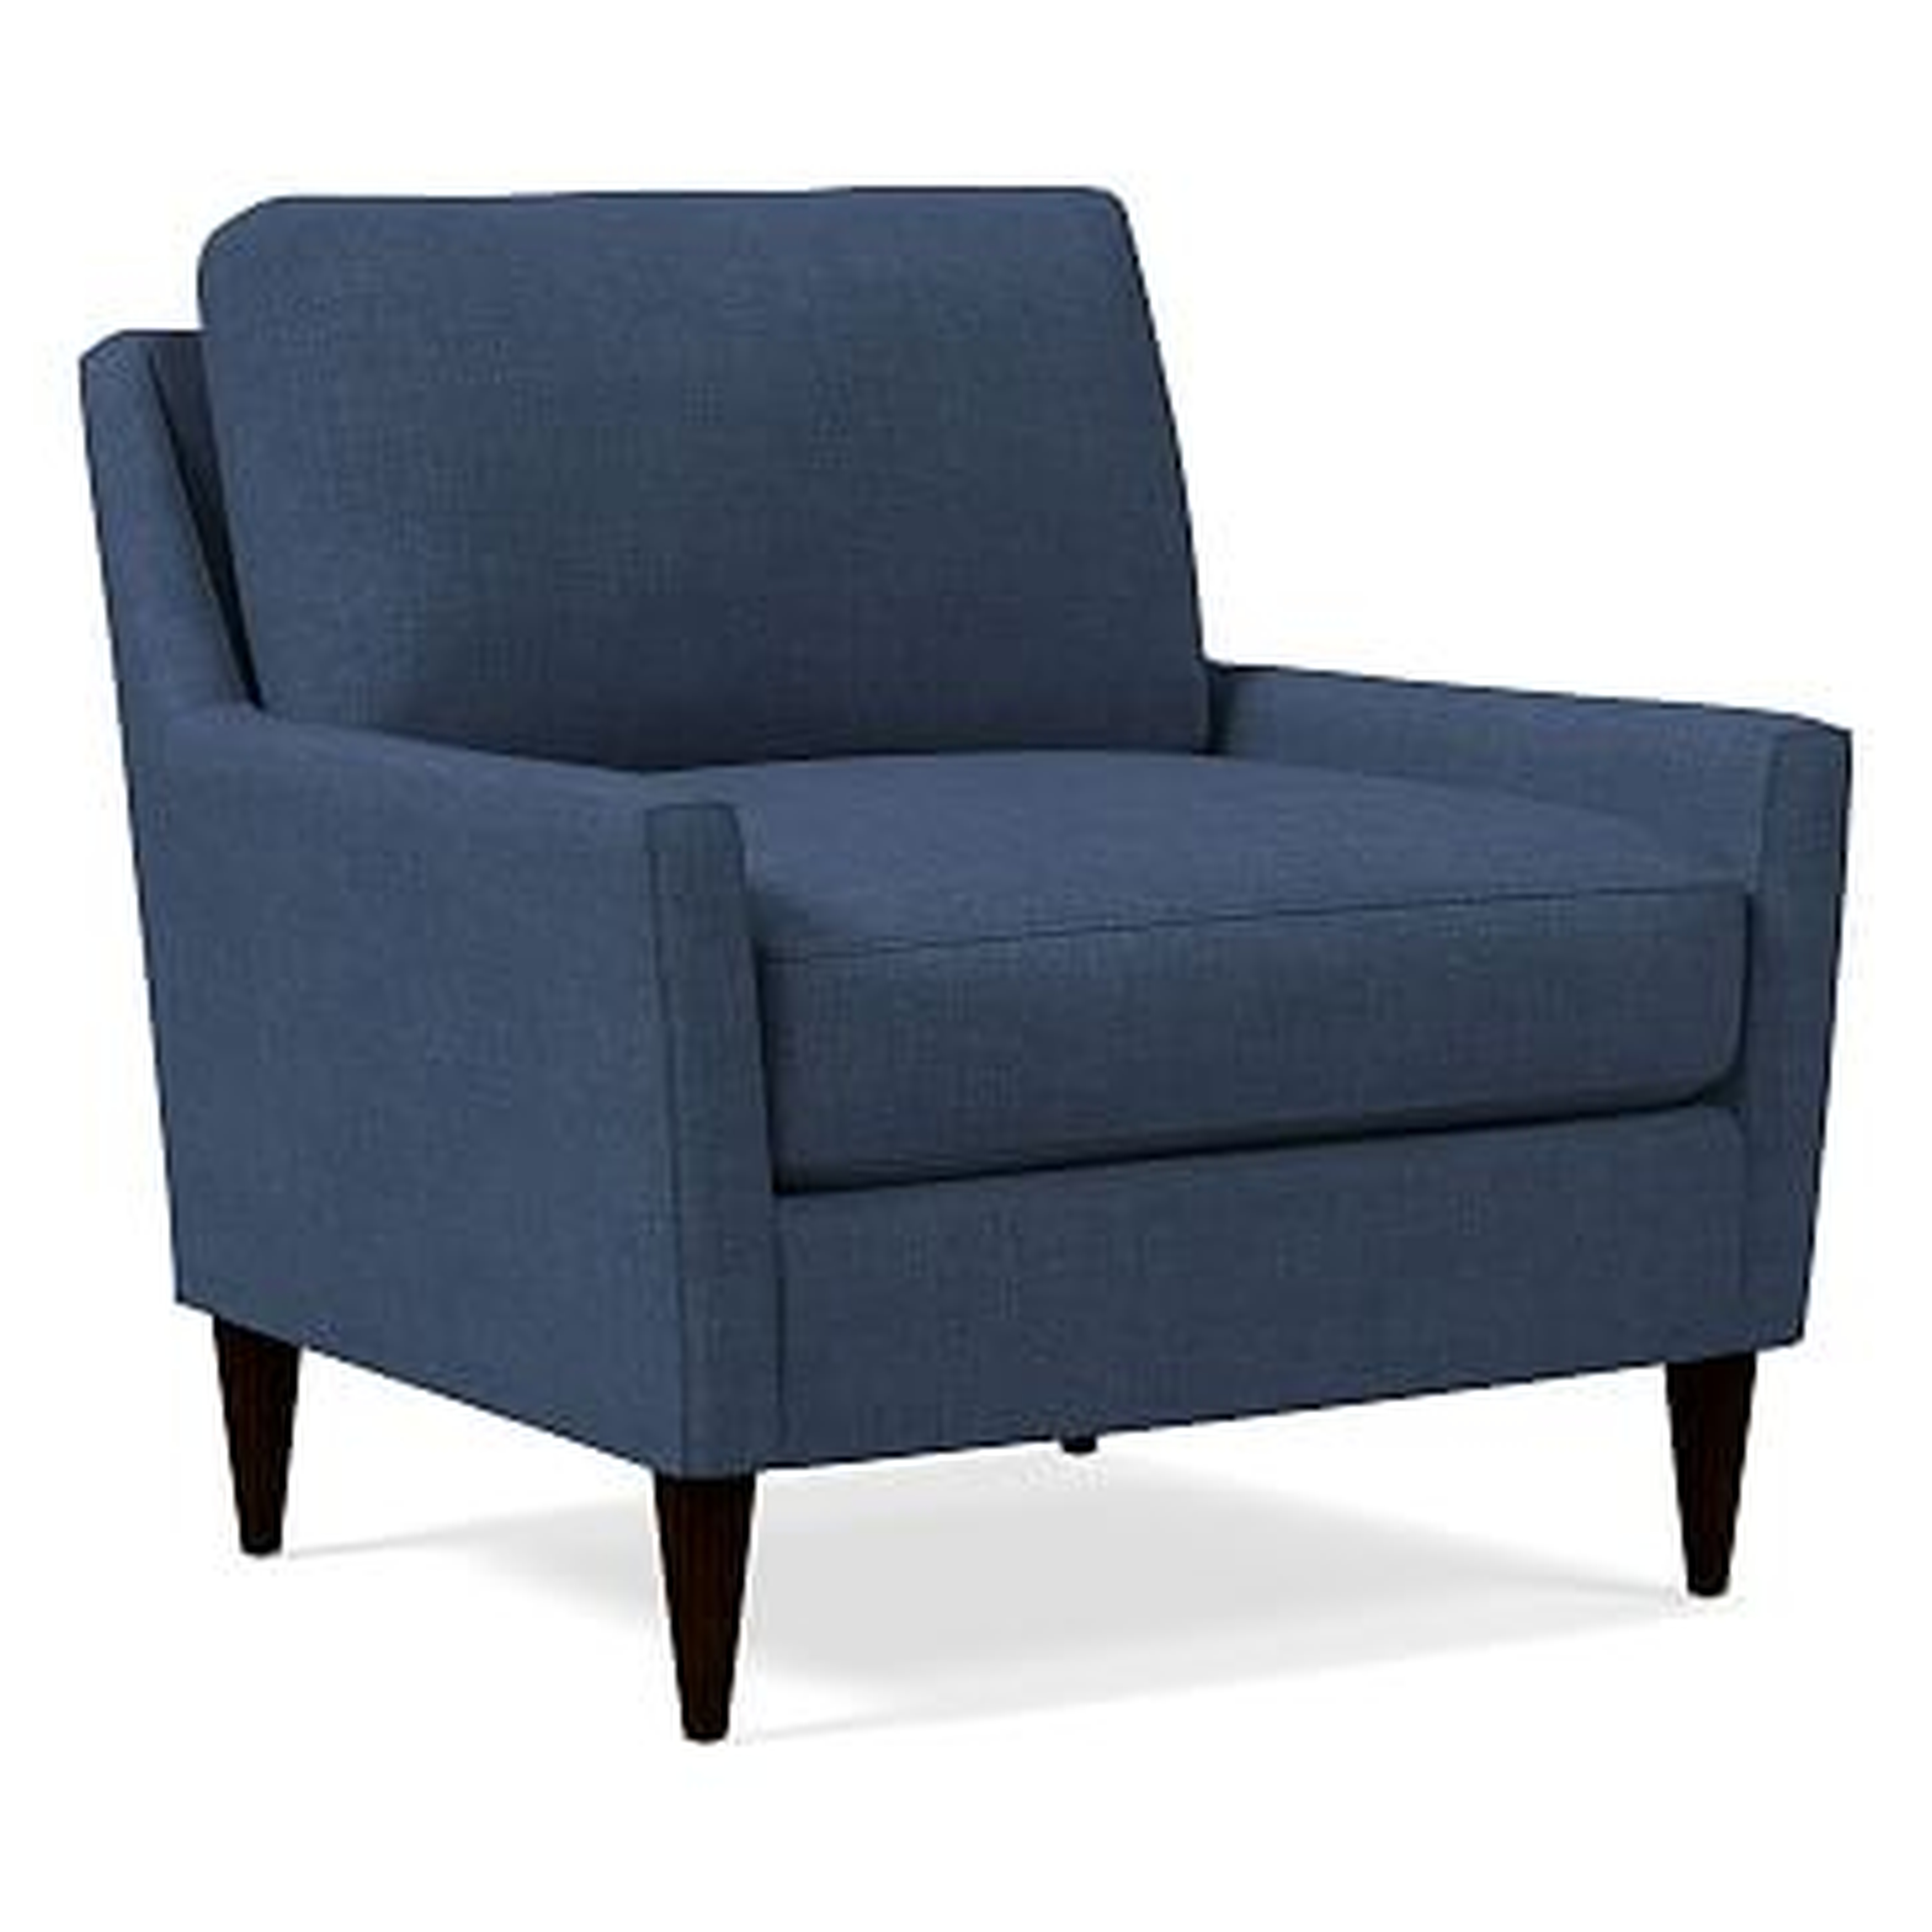 Everett Chair, Performance Yarn Dyed Linen Weave, French Blue, Chocolate - West Elm